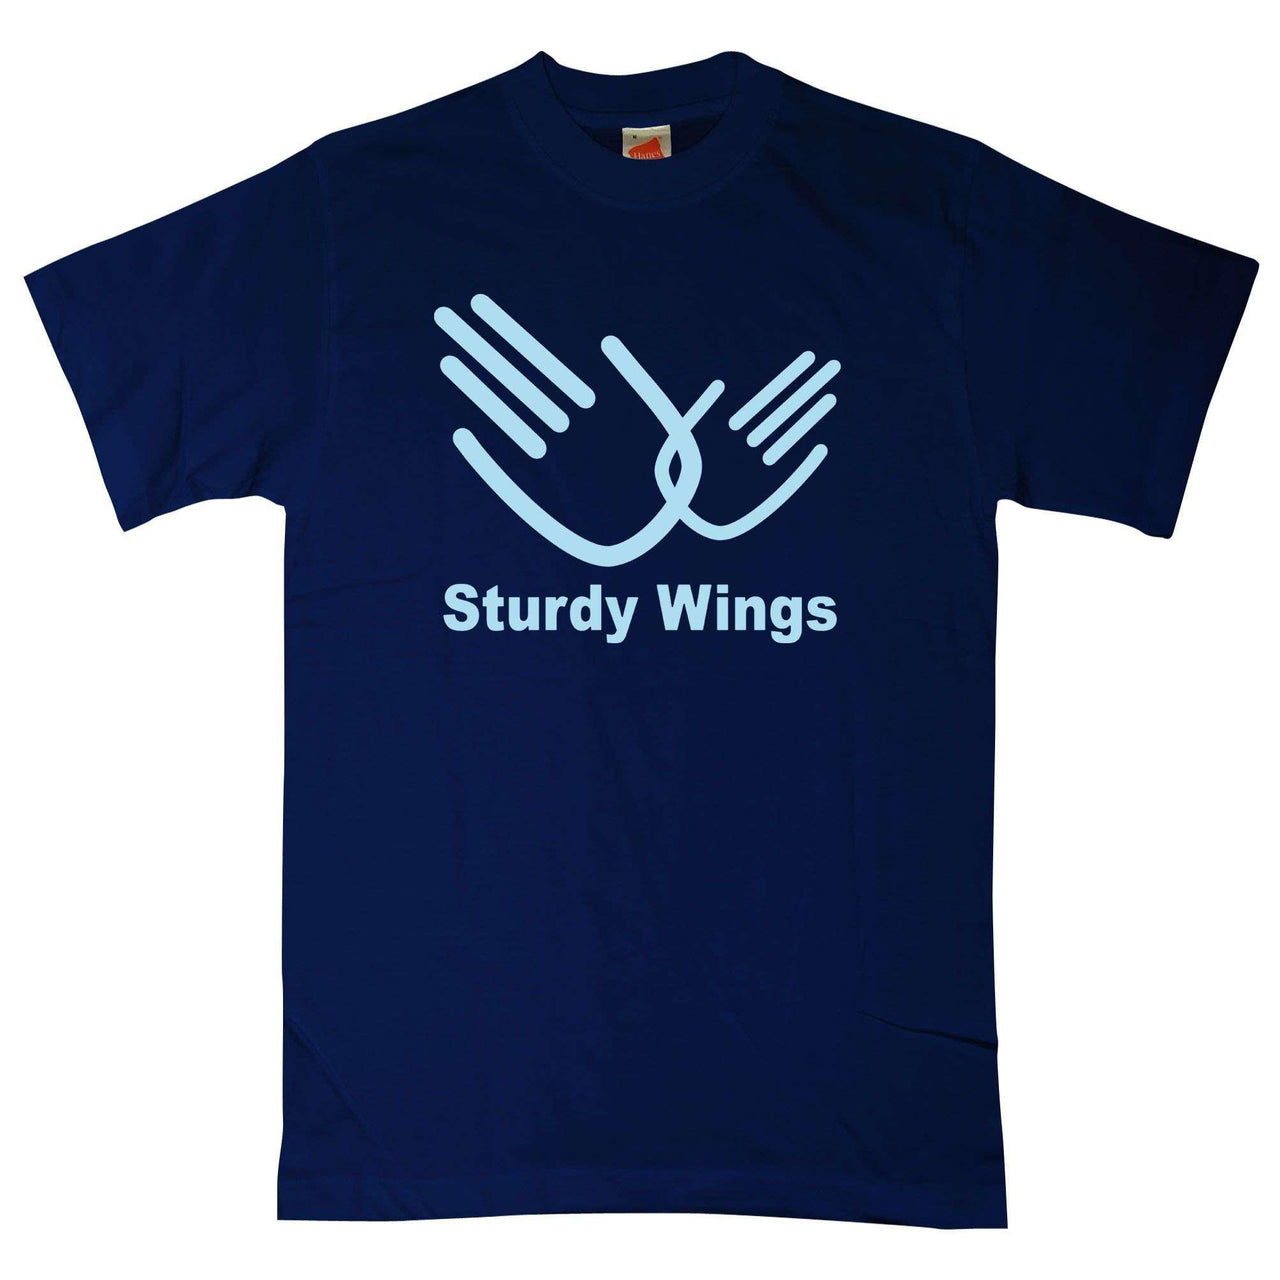 Sturdy Wings T-Shirt For Men 8Ball